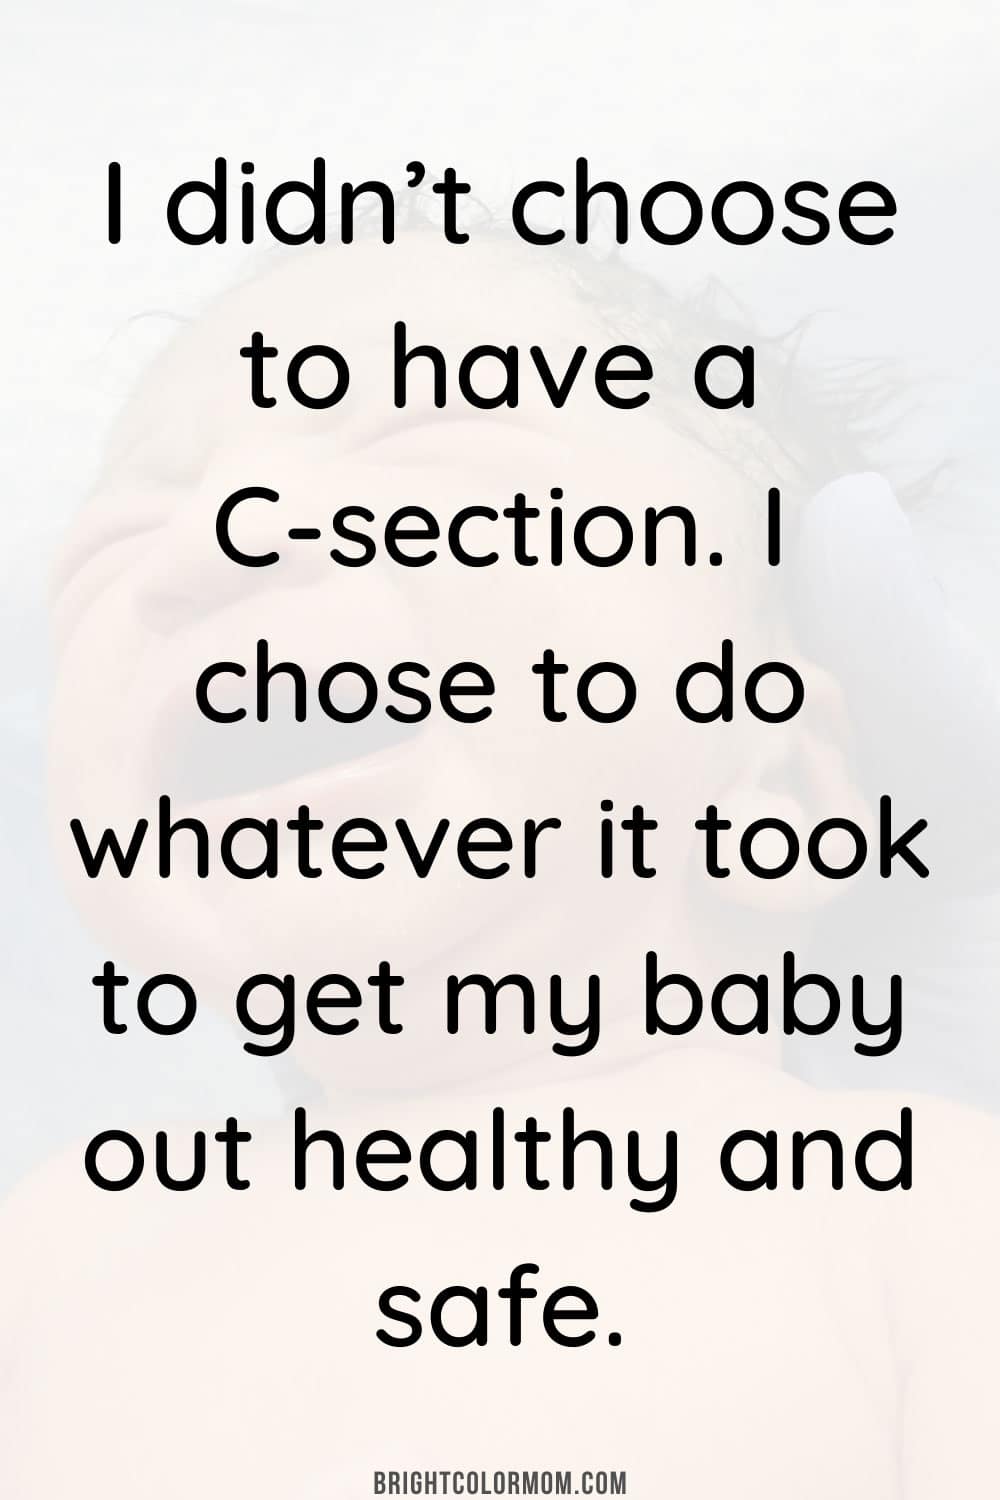 I didn’t choose to have a C-section. I chose to do whatever it took to get my baby out healthy and safe.